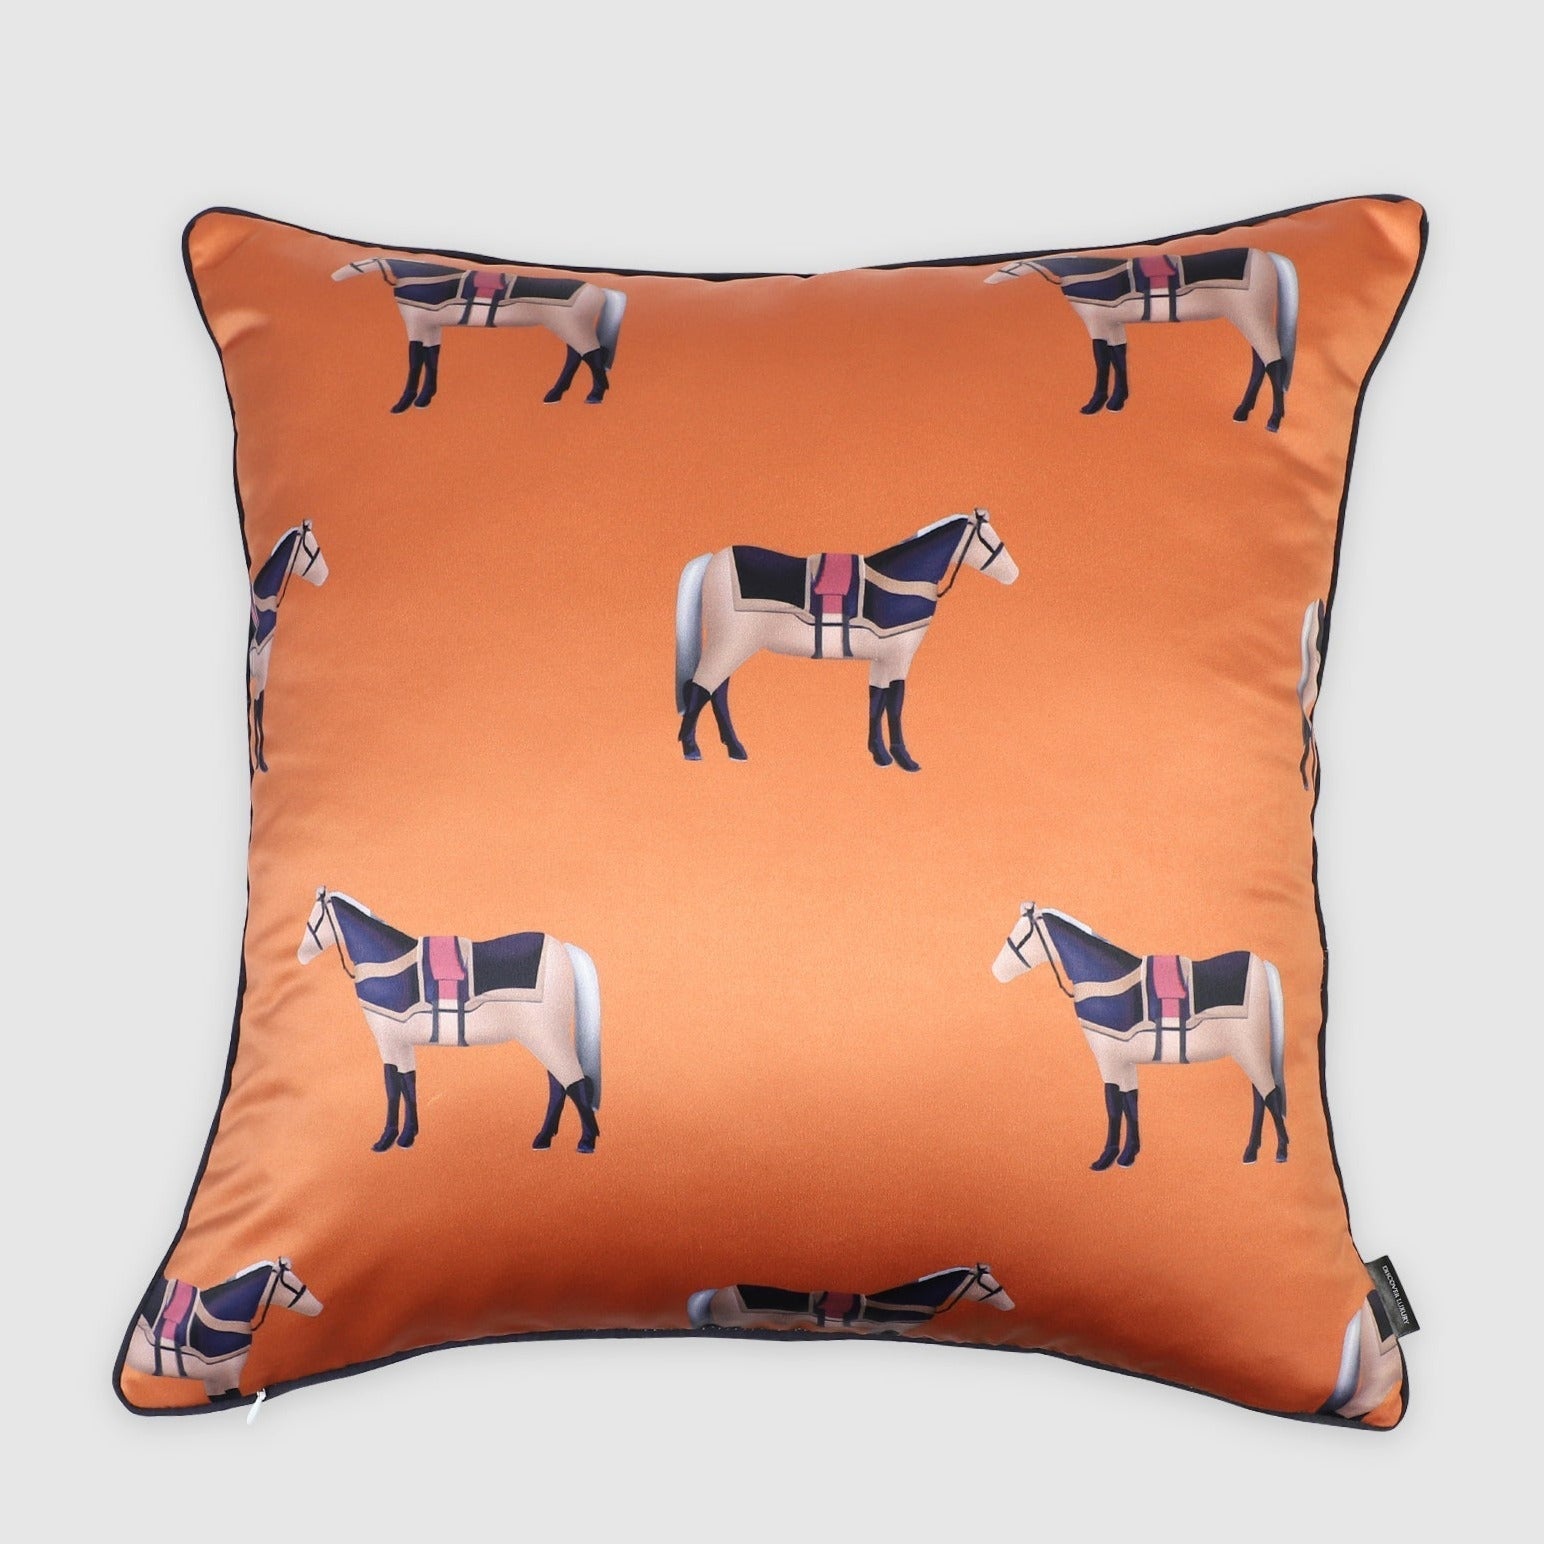 Galloping into Dusk Pillow Cover - Pillow Covers